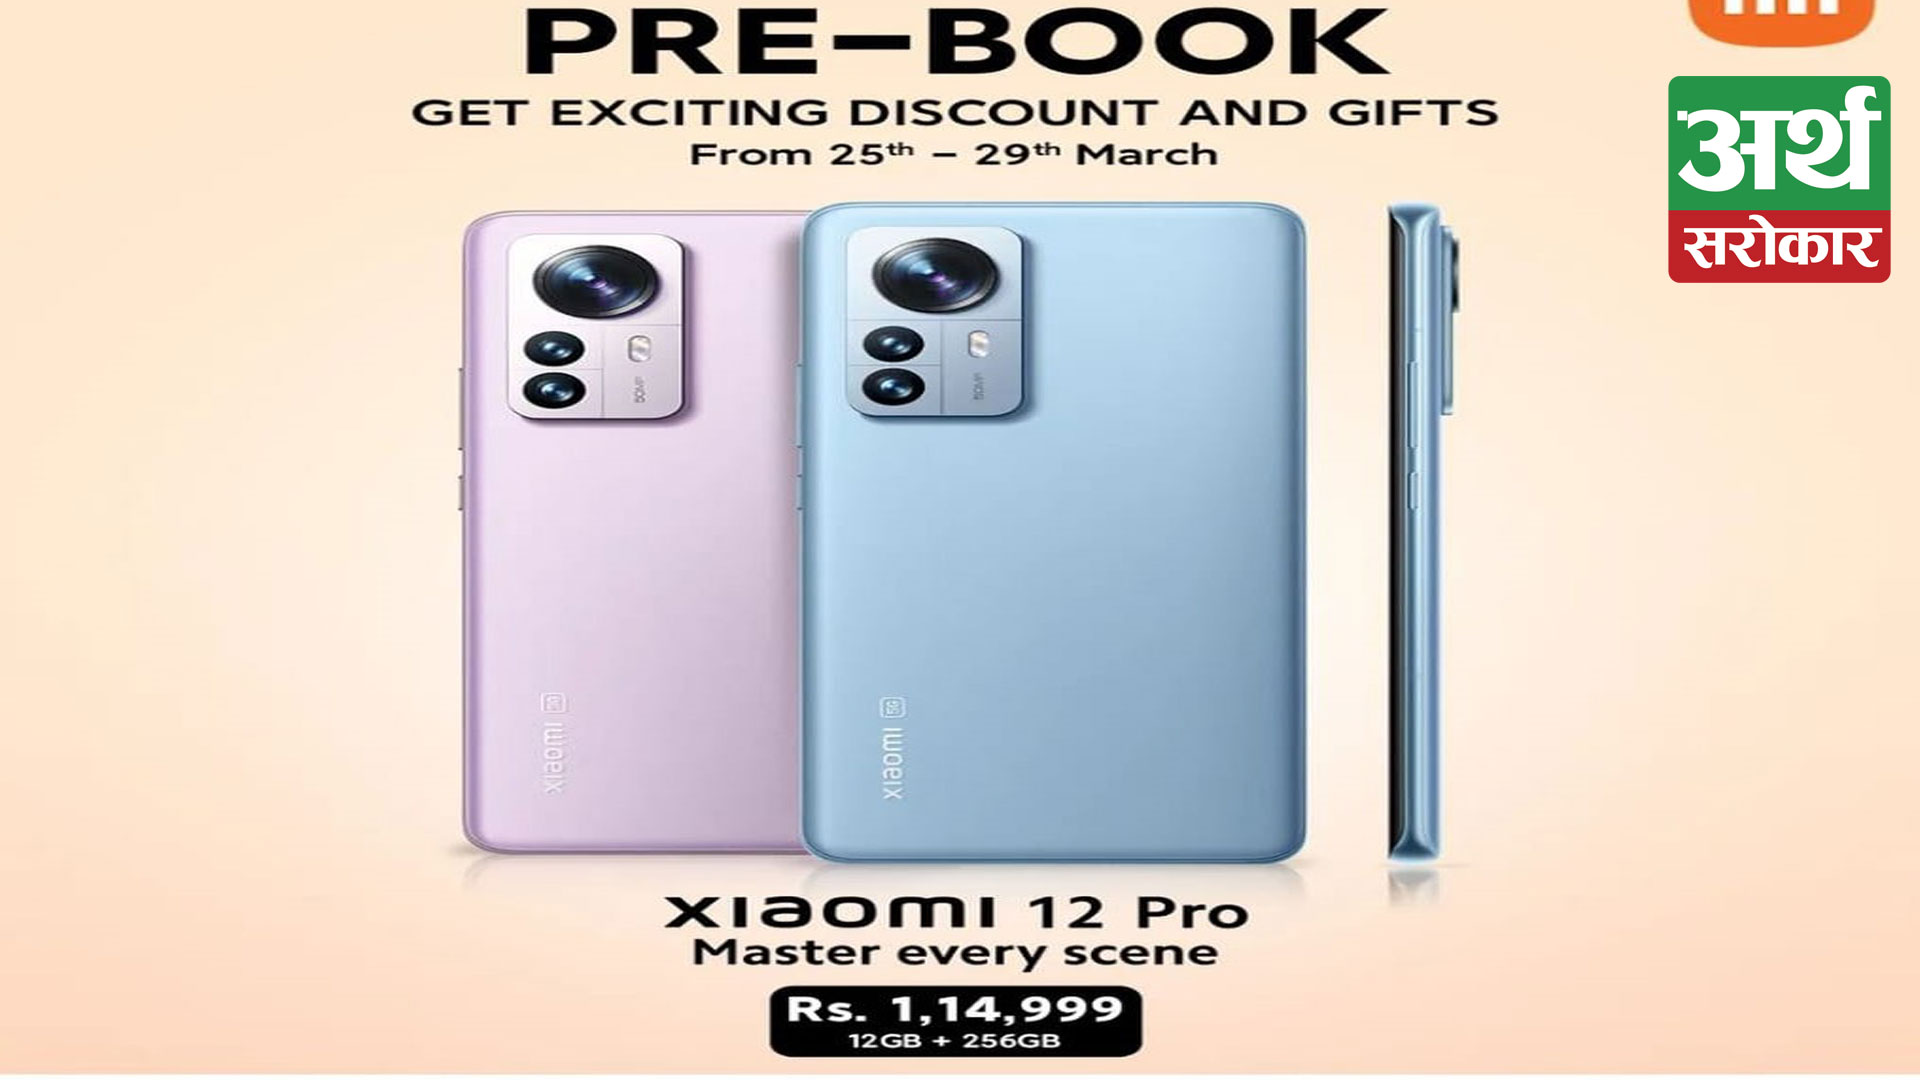 Xiaomi Nepal announces pre-booking for most awaited smartphone-Xiaomi 12 Pro